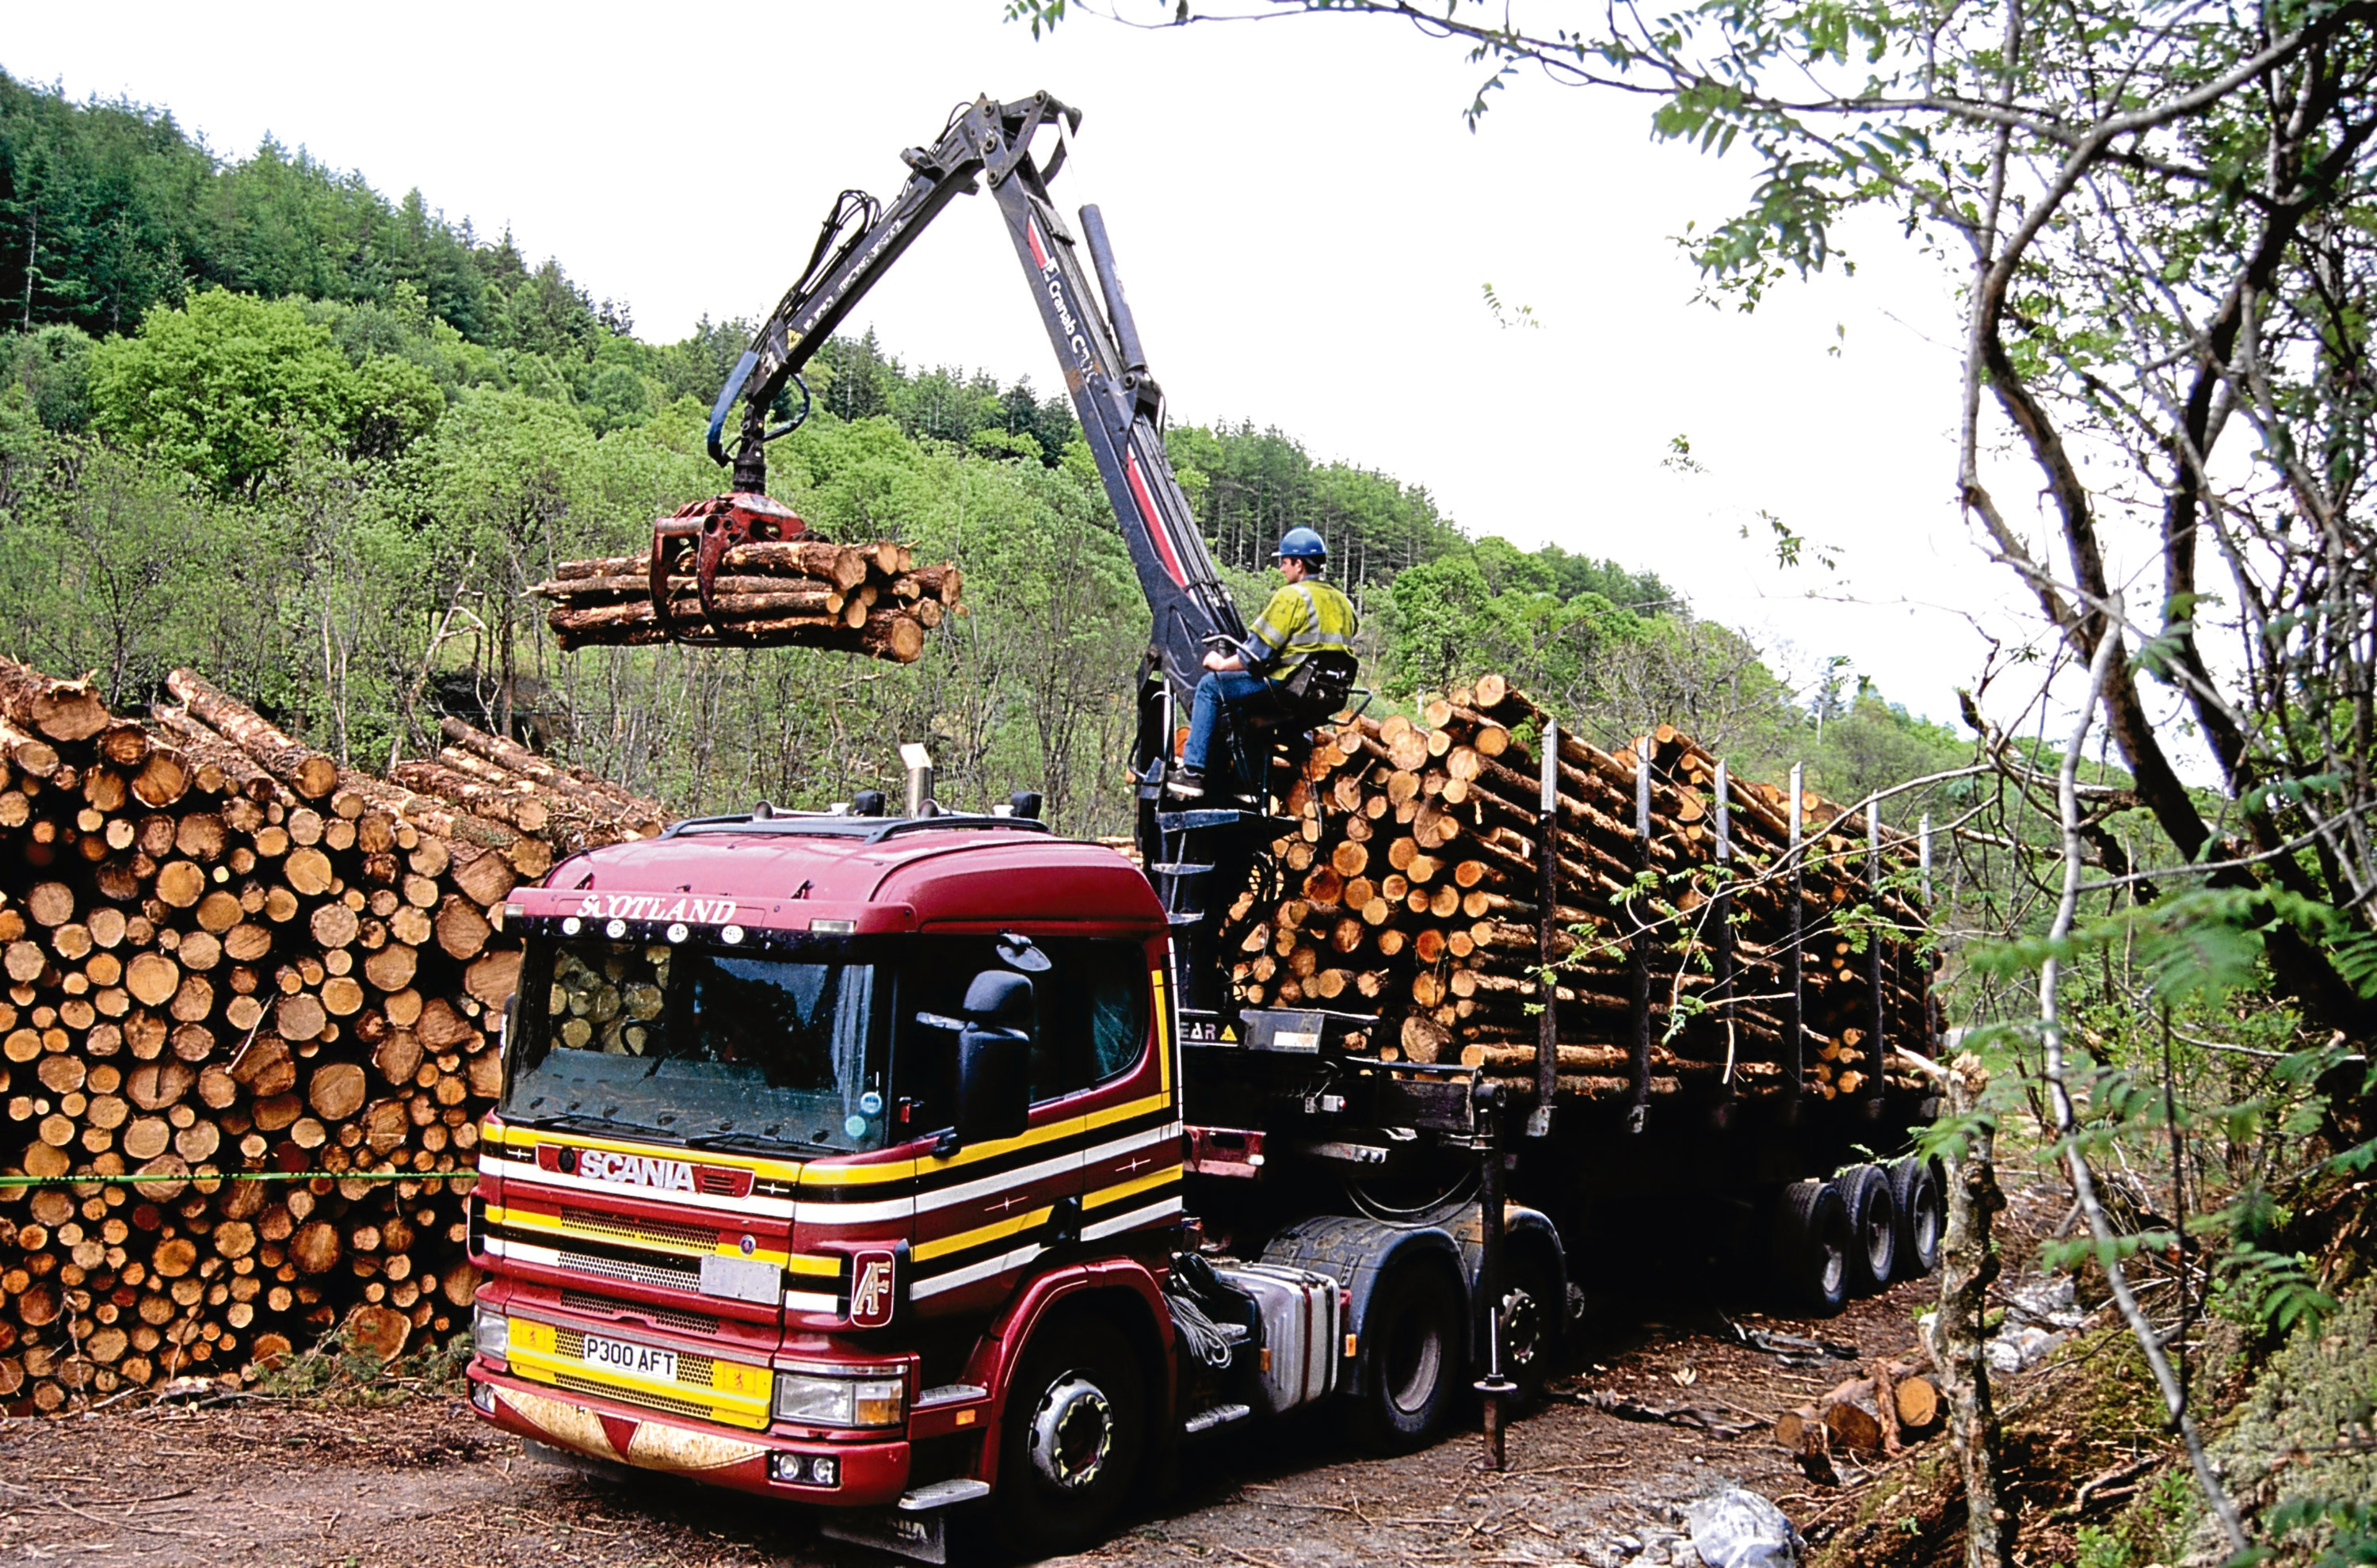 GROWING PLACES: Rural Secretary Fergus Ewing said the volume of timber harvested is predicted to rise 14%